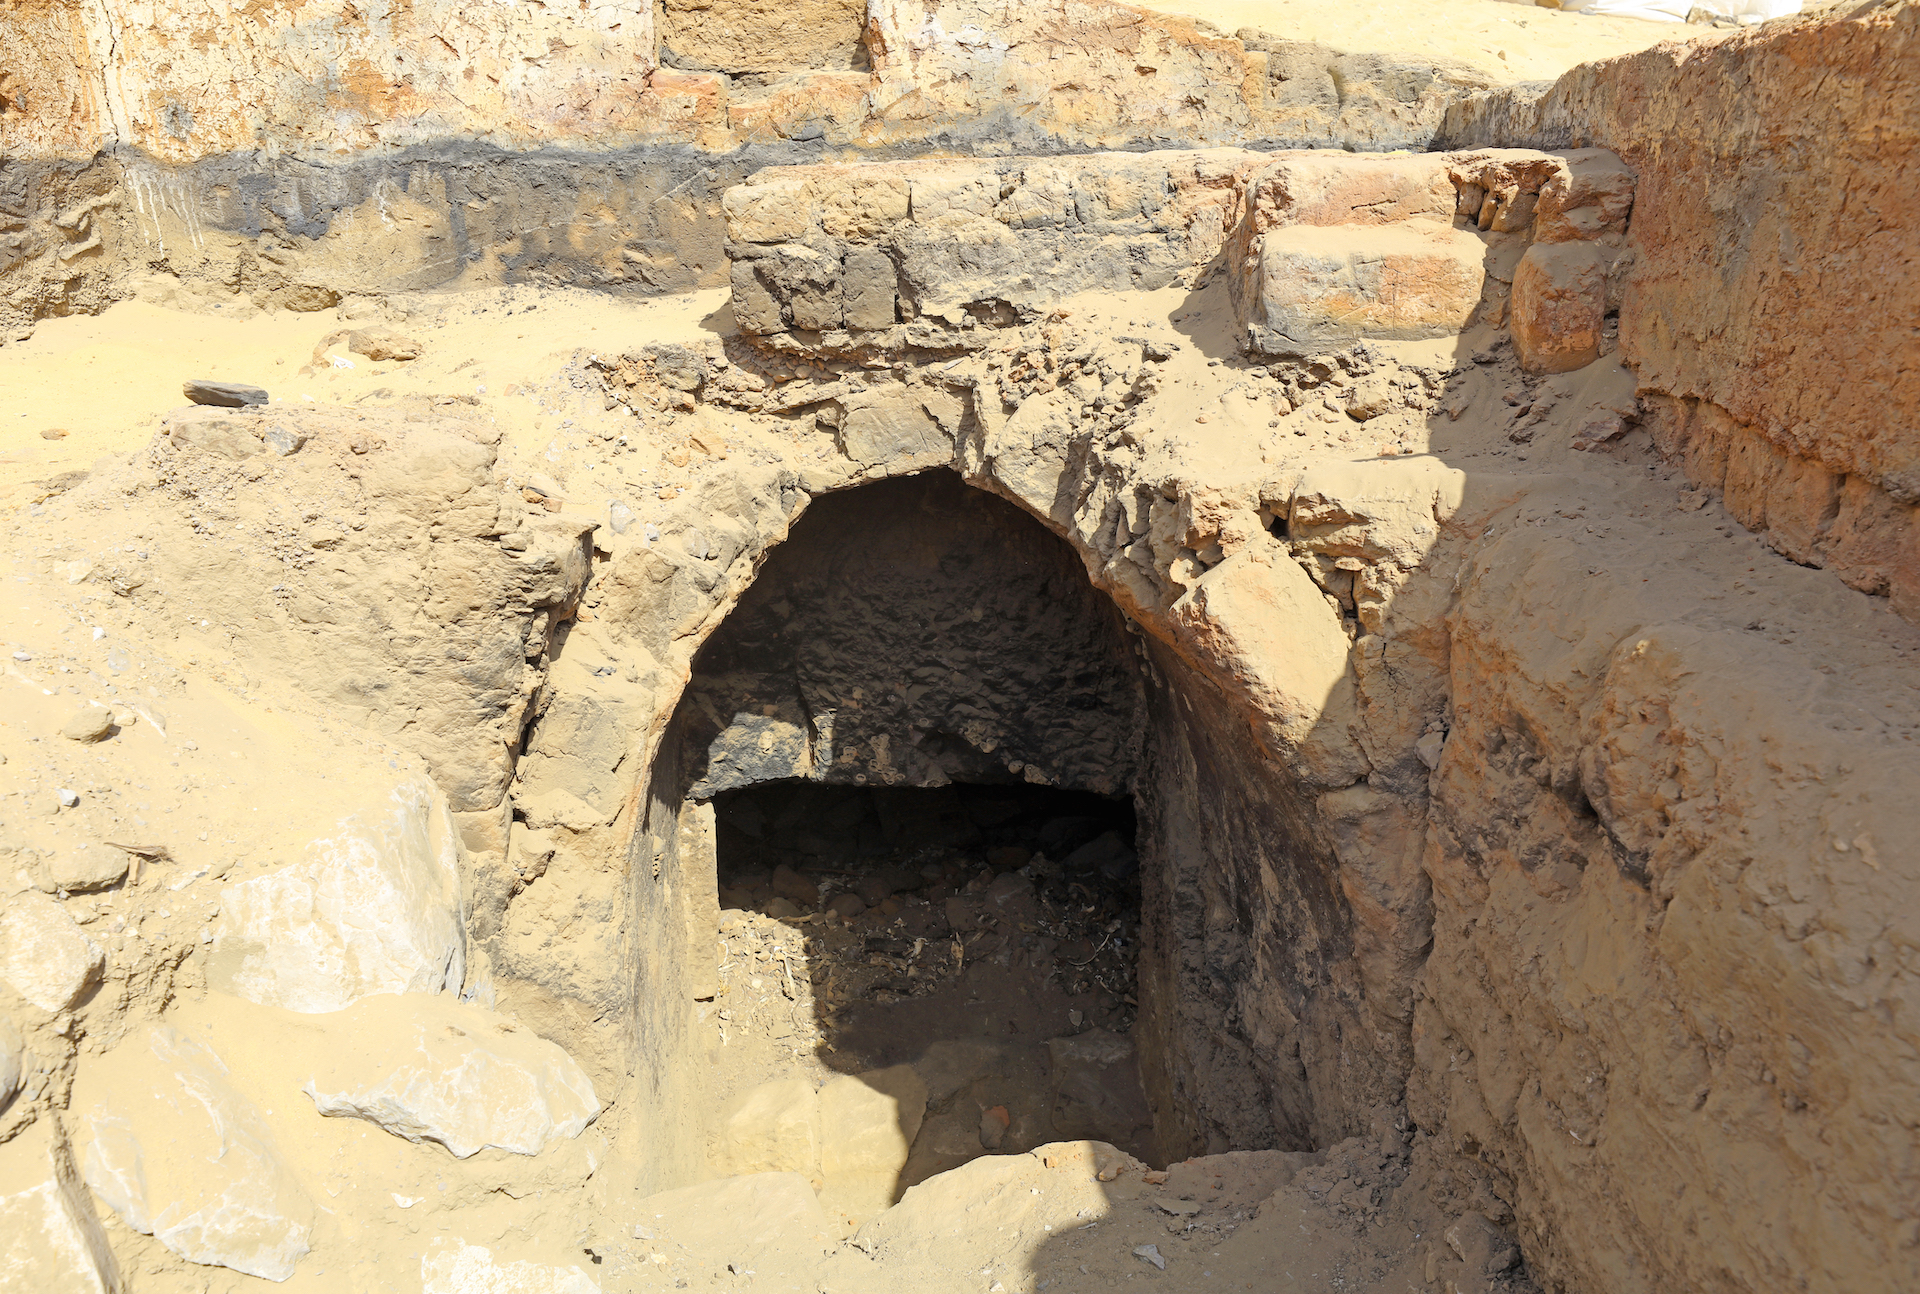 The entrance to the newly discovered tomb.